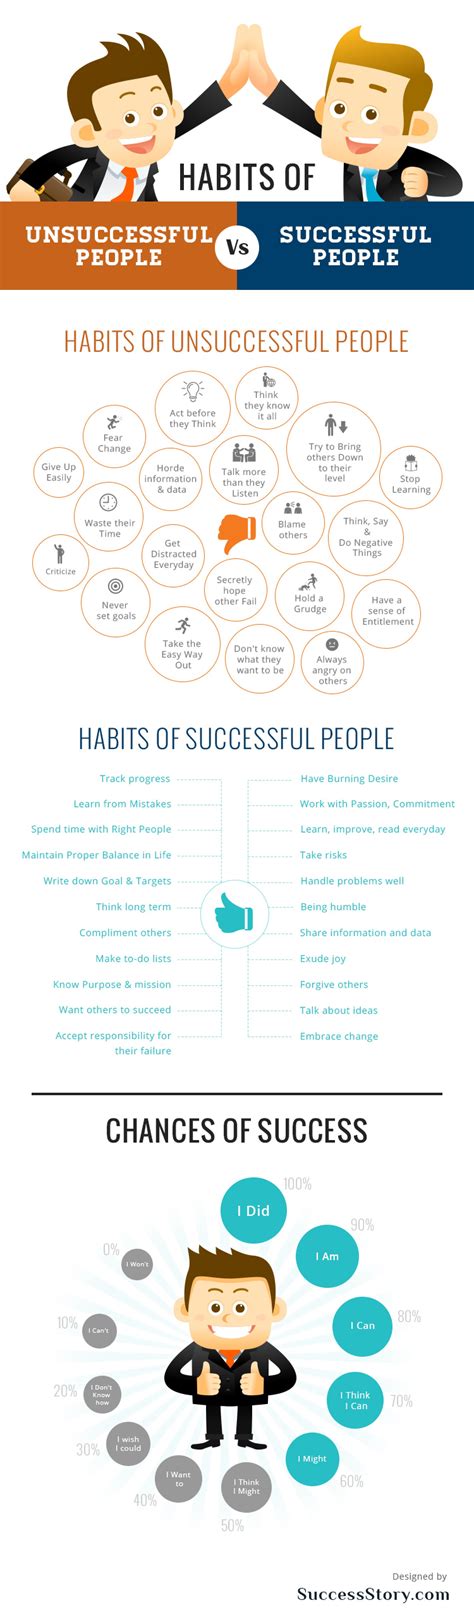 Habits Of Successful People Infographic Self Help Daily